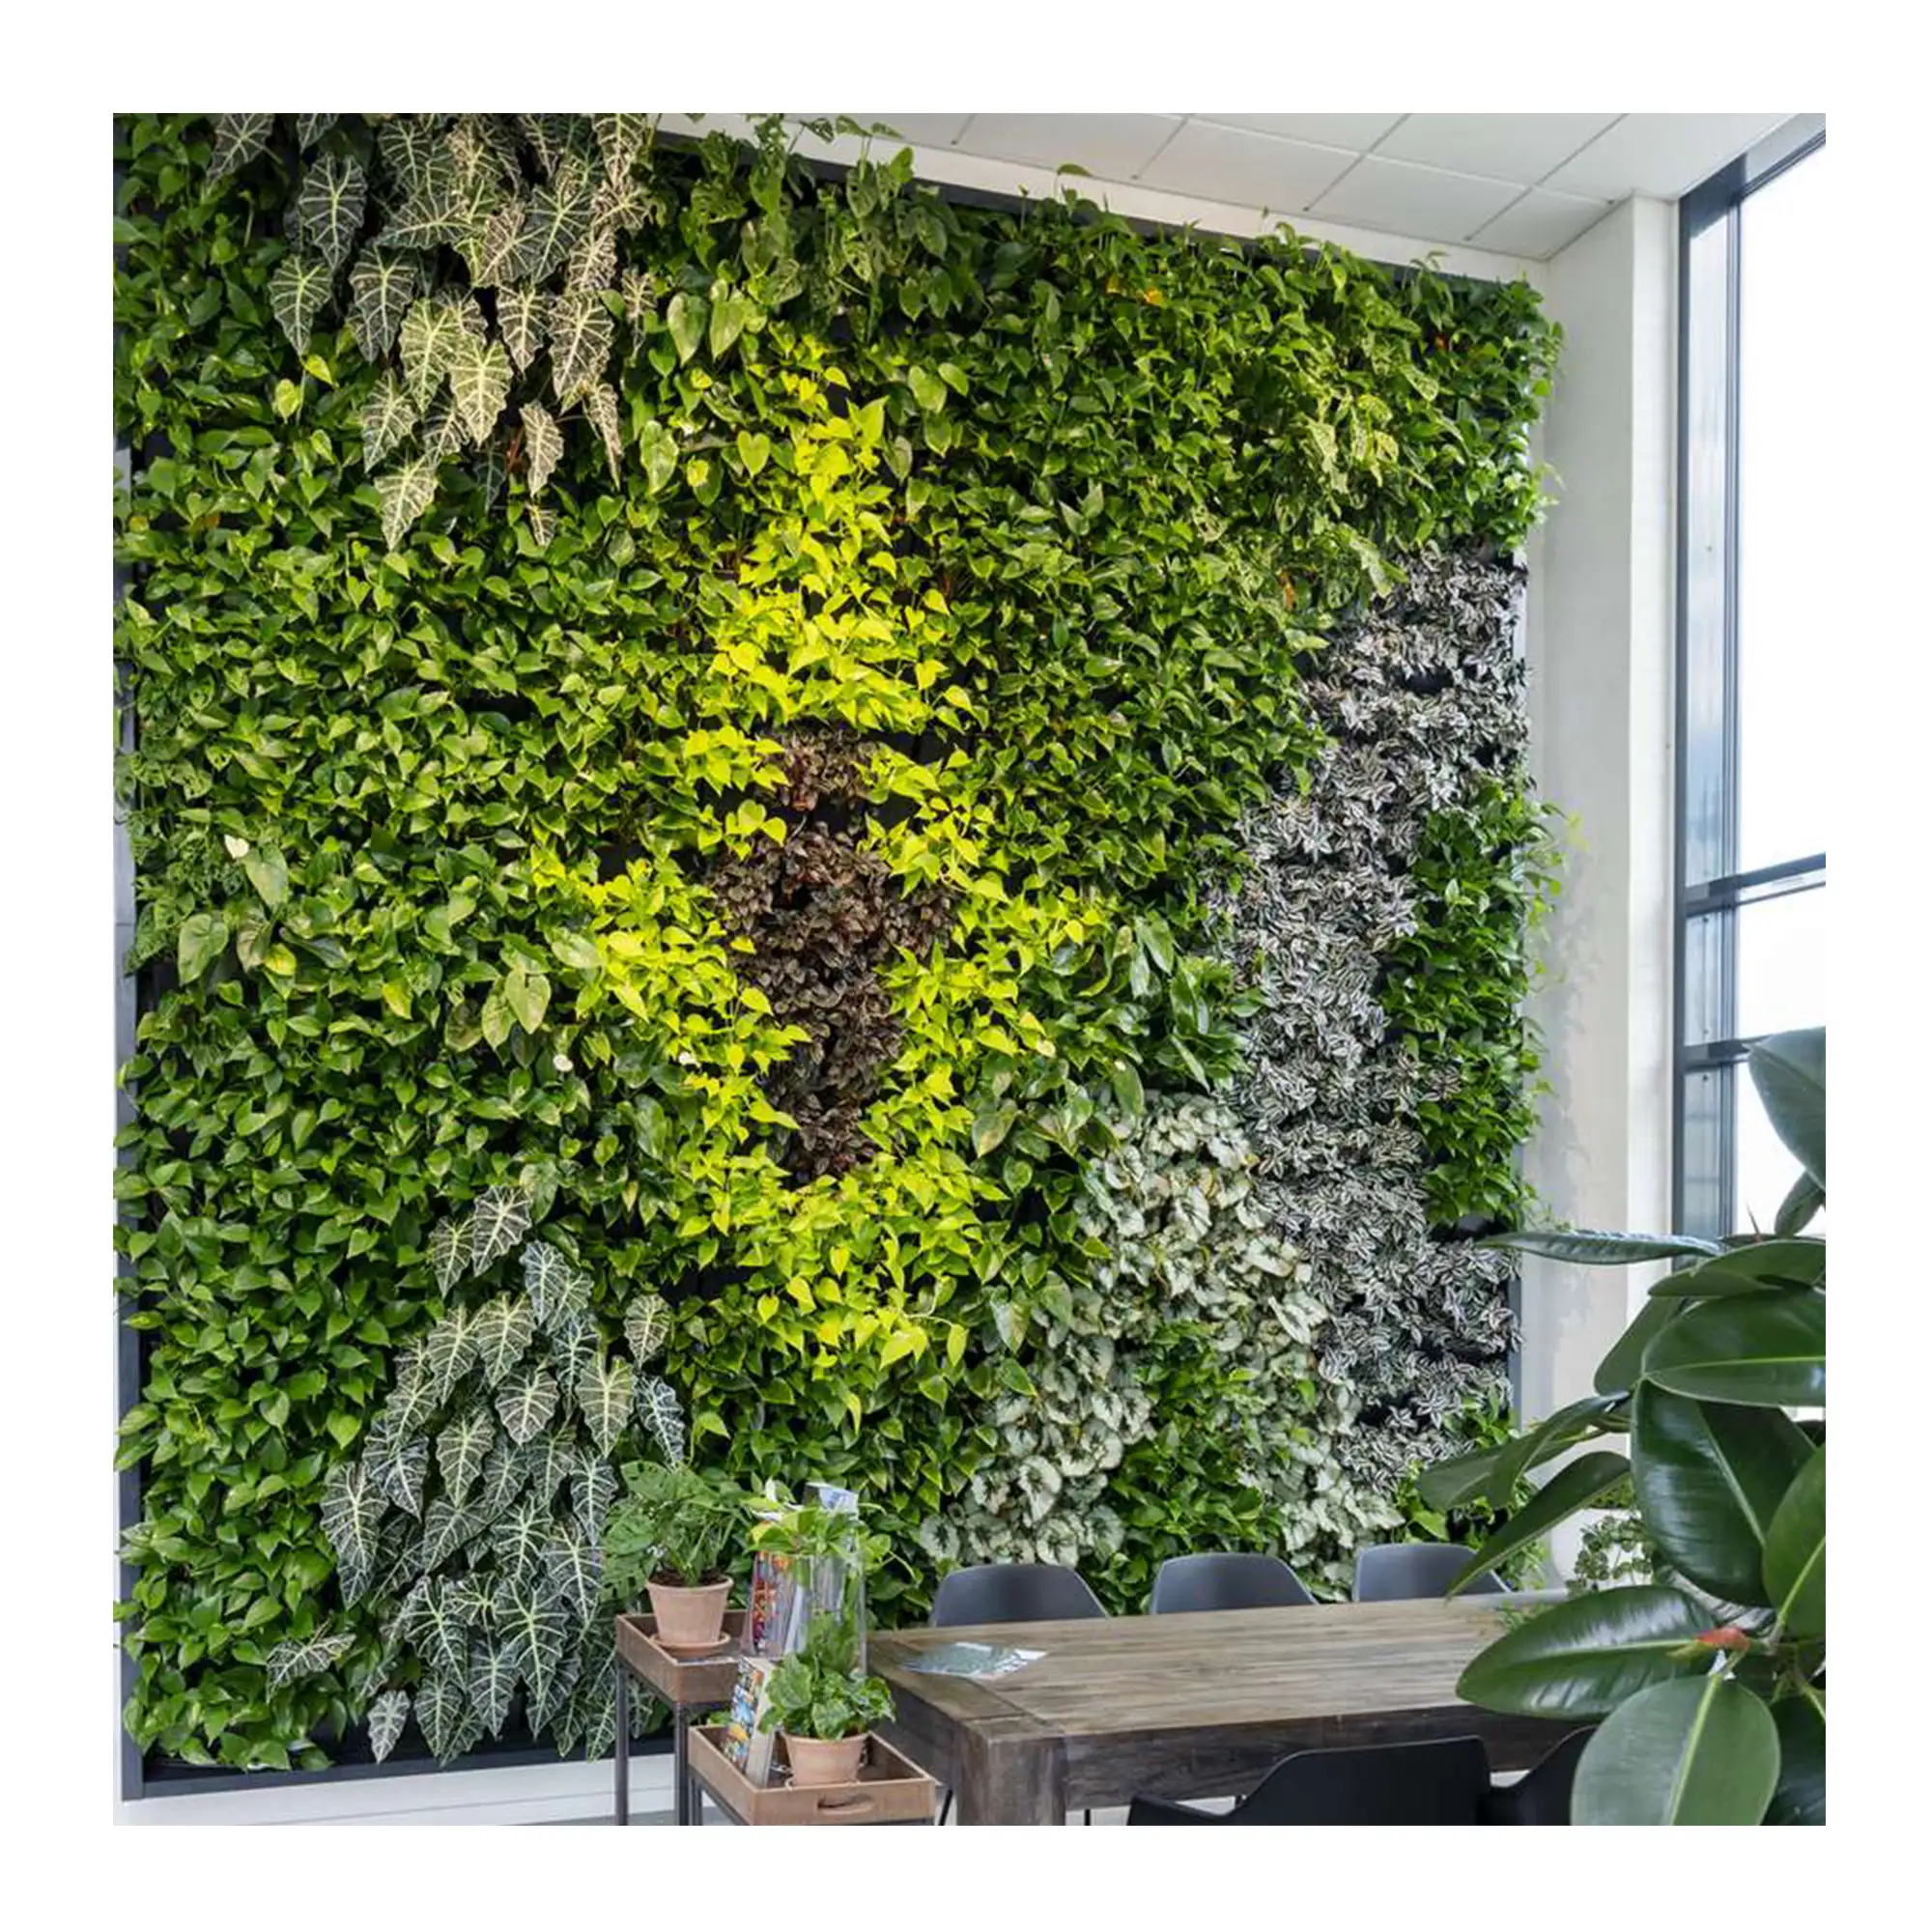 Grape Leaf A Indoor Outdoor Vertical Grape Leaf Greenery Backdrop Panel Decor Artificial Foliage Plant Green Grass Wall